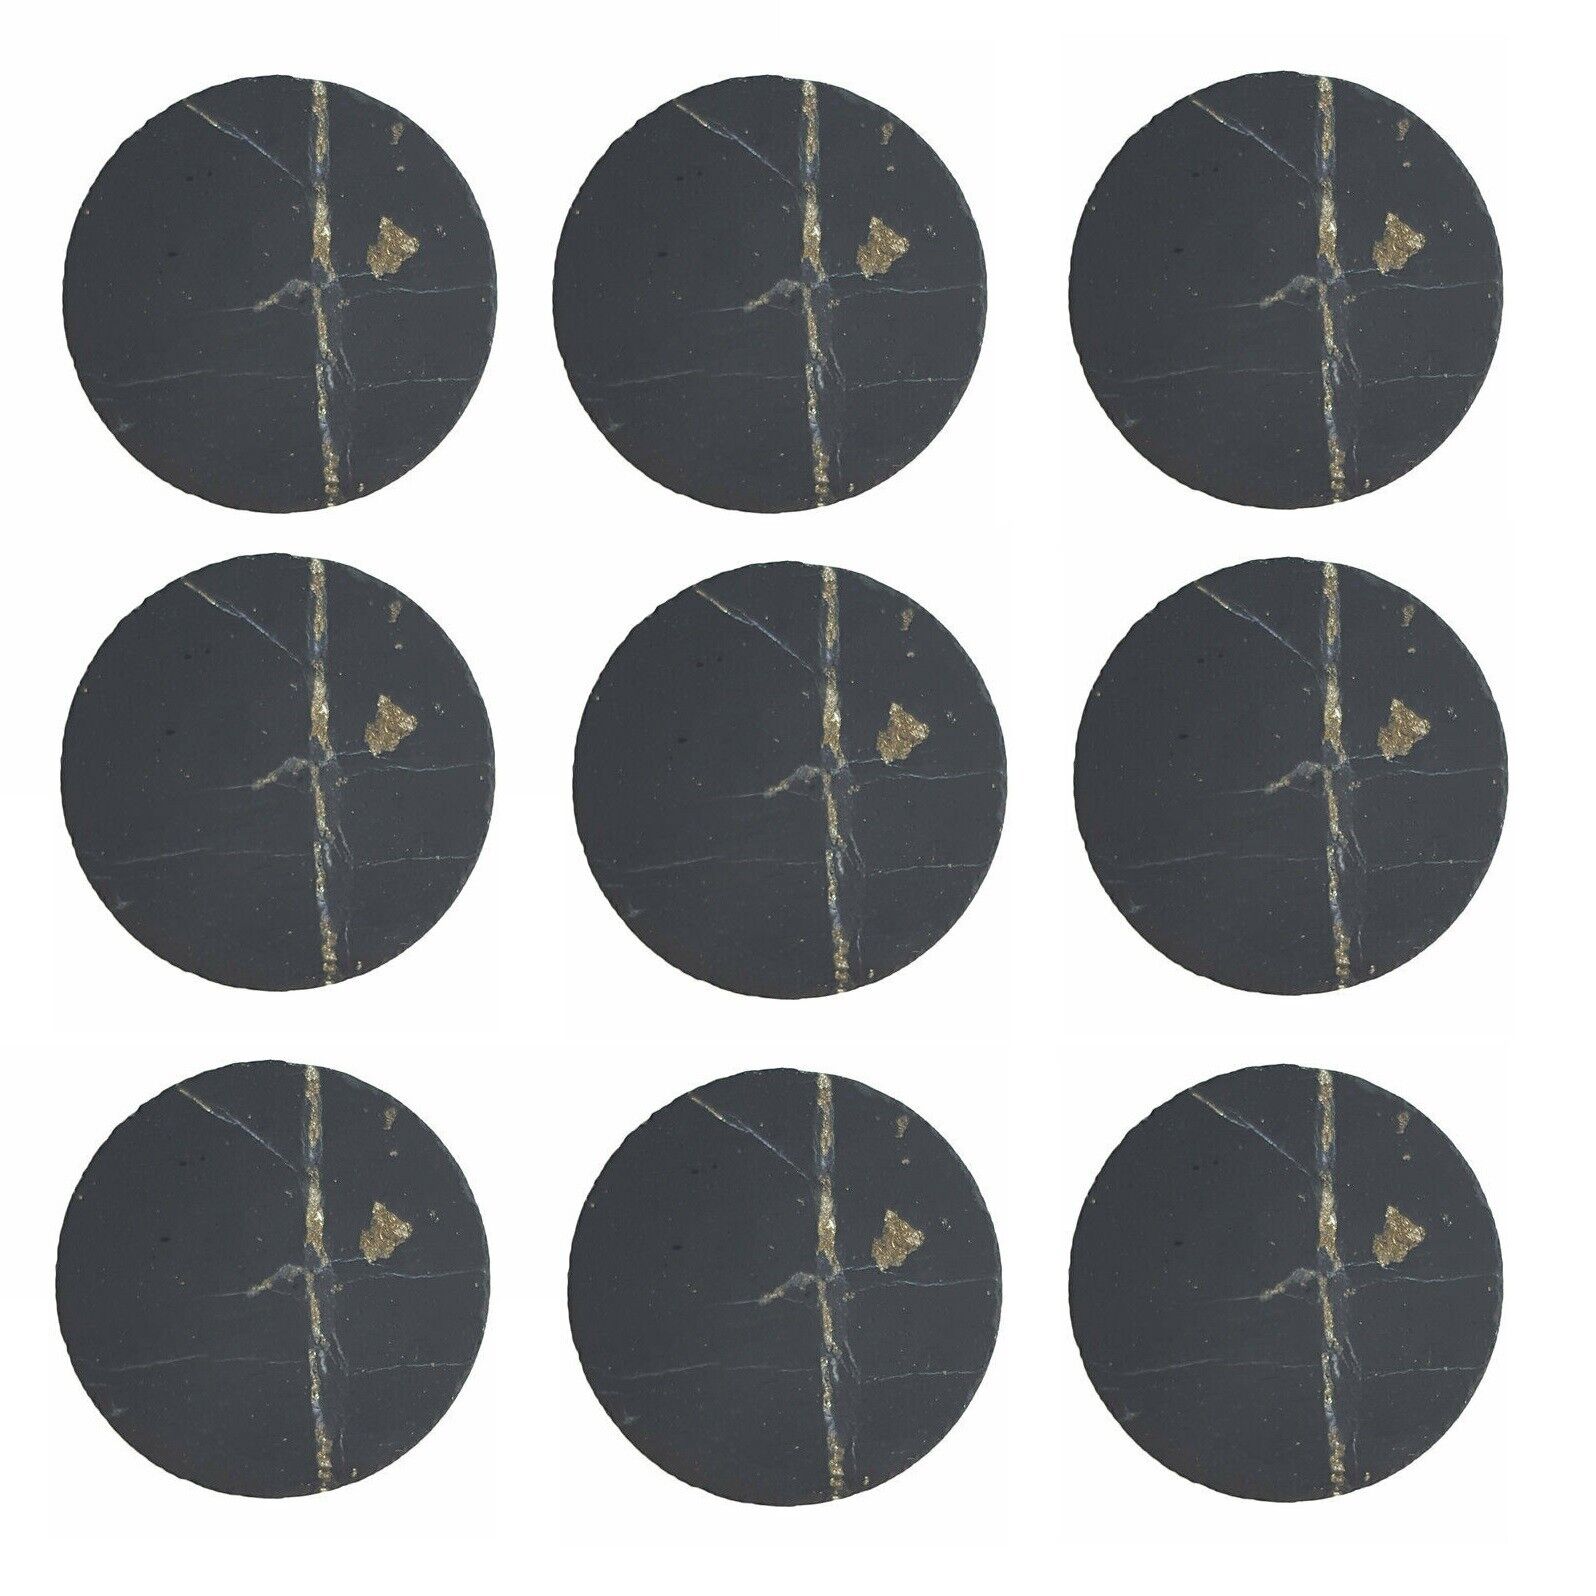 SHUNGITE Stickers 9 pcs EMF Protection Plate Cell Phone Round 19 mm UnPolished